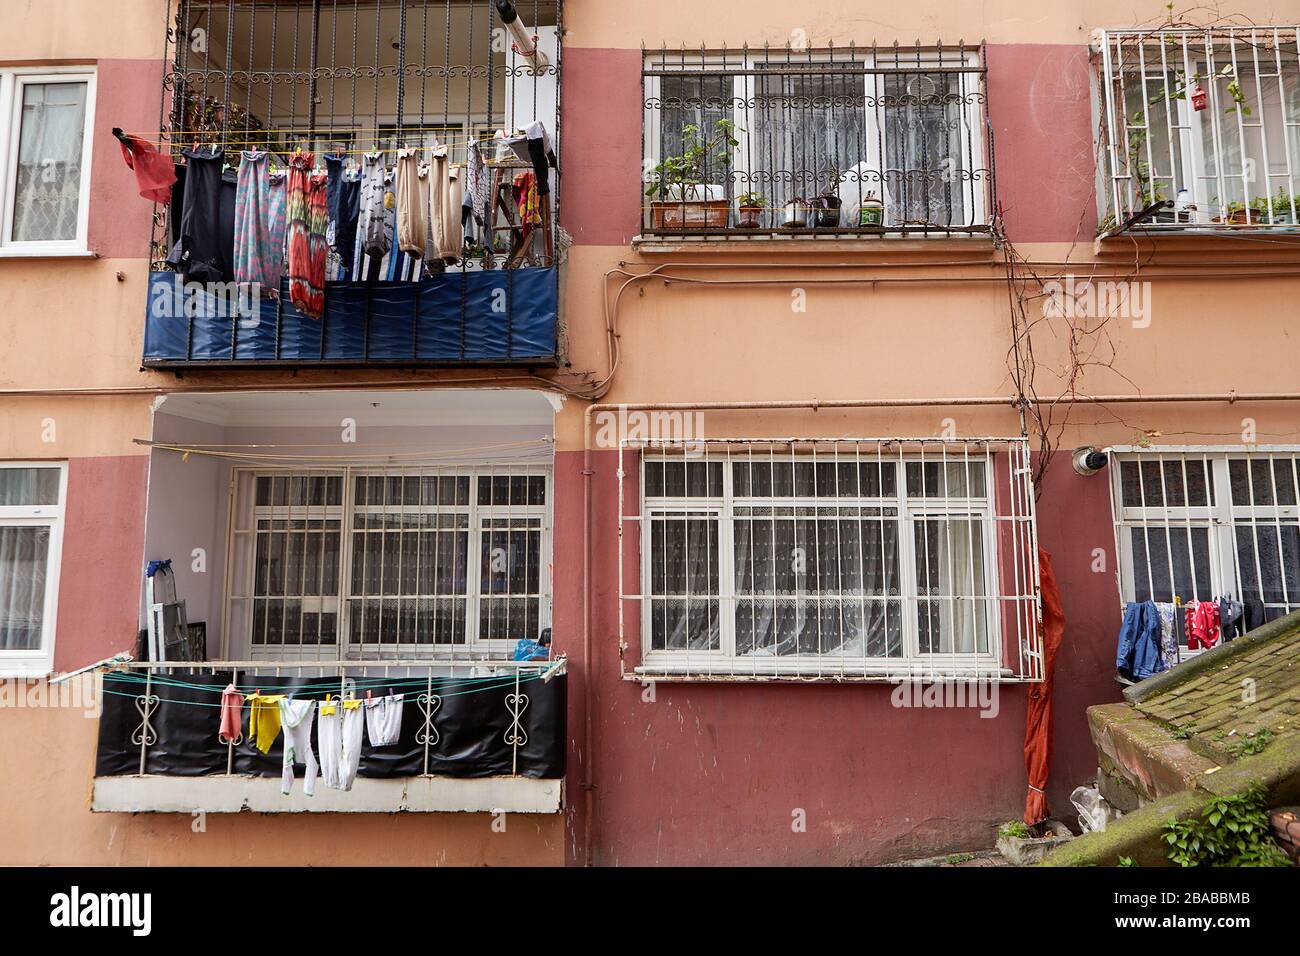 Istanbul, Turkey - February 12, 2020: The facade of an apartment building with barred windows and ropes for drying wet clothes in the open air. Stock Photo